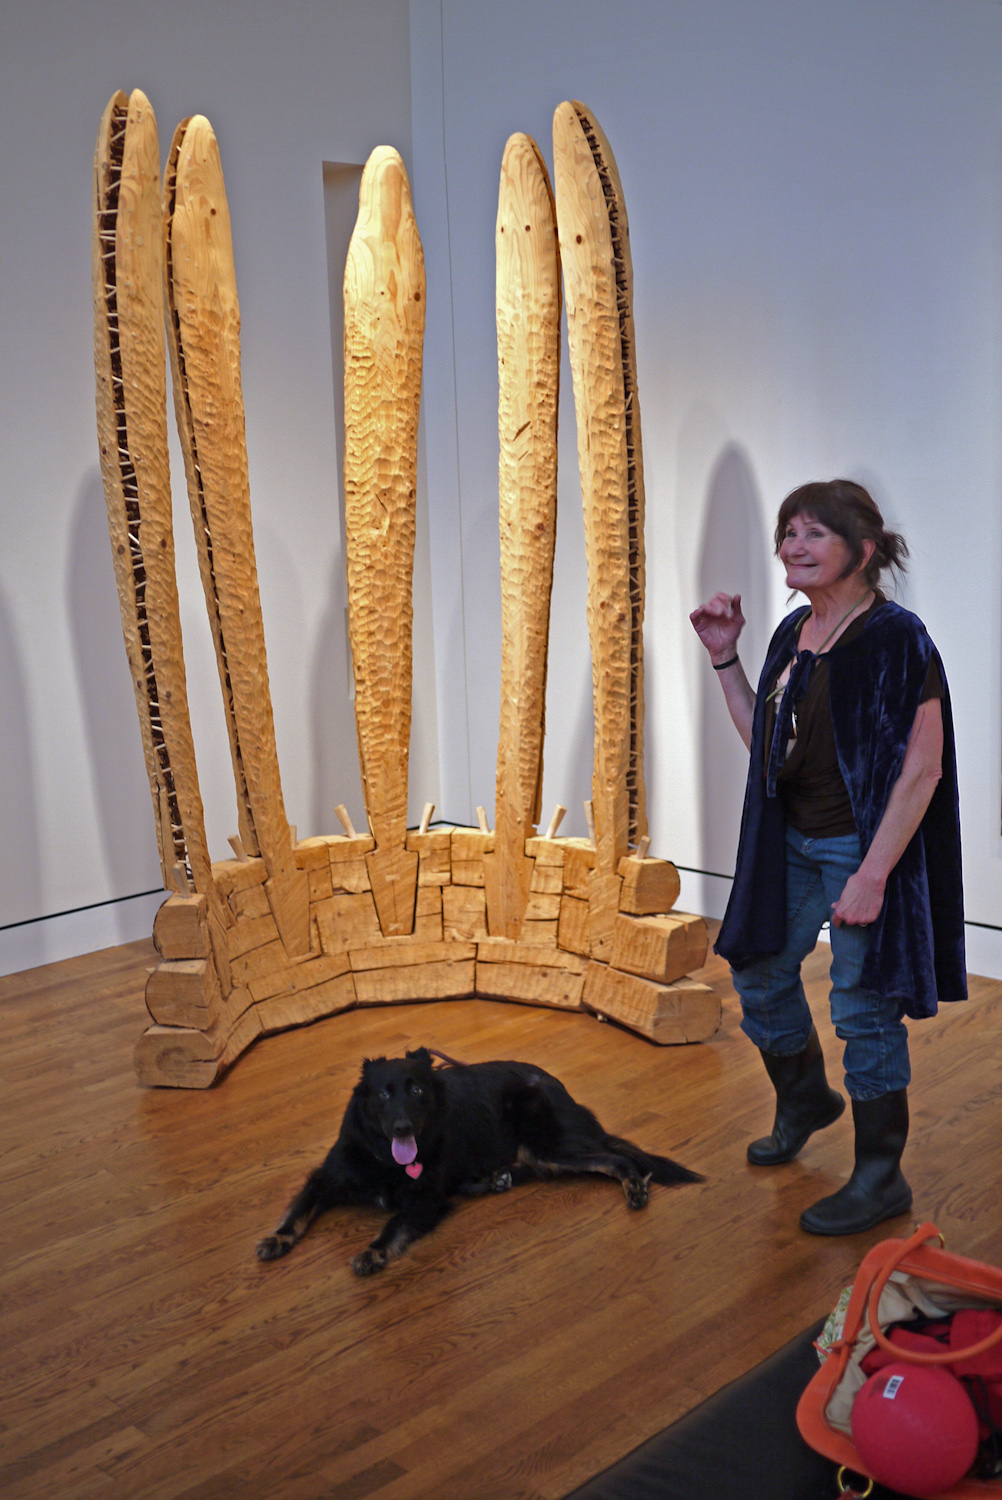     Owner Sharron with dog Sydney at “Surround” by Lee C. Imonen, 1996. Image taken on March 13, 2013.   